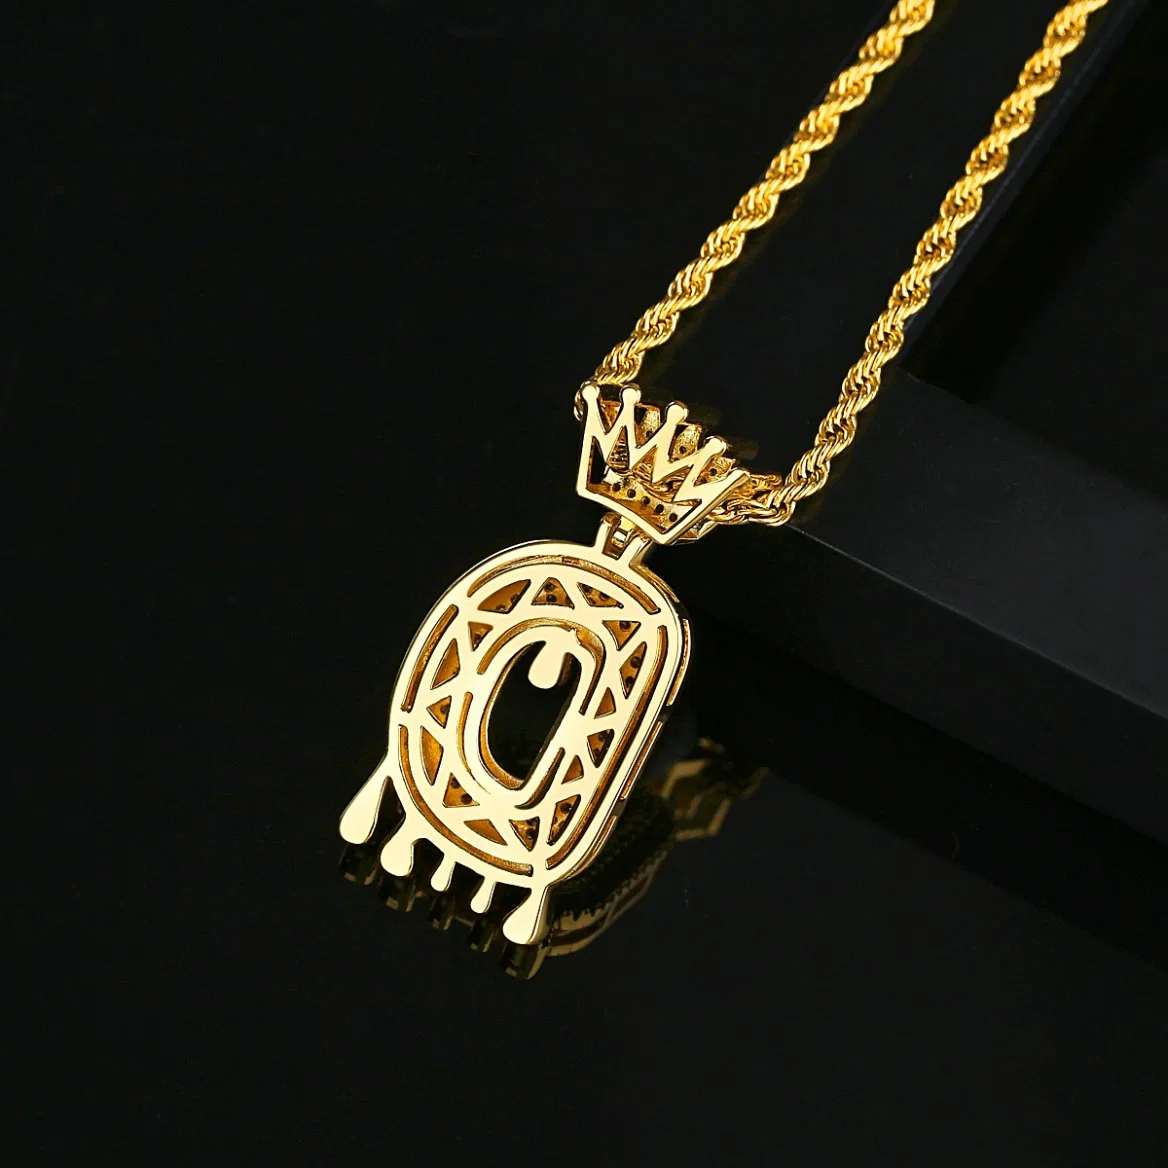 Men Gold Plated Hip Hop Twist Chain 26 Initial Letter Pendant Necklace Jewelry with Full 3A Zircon Stone